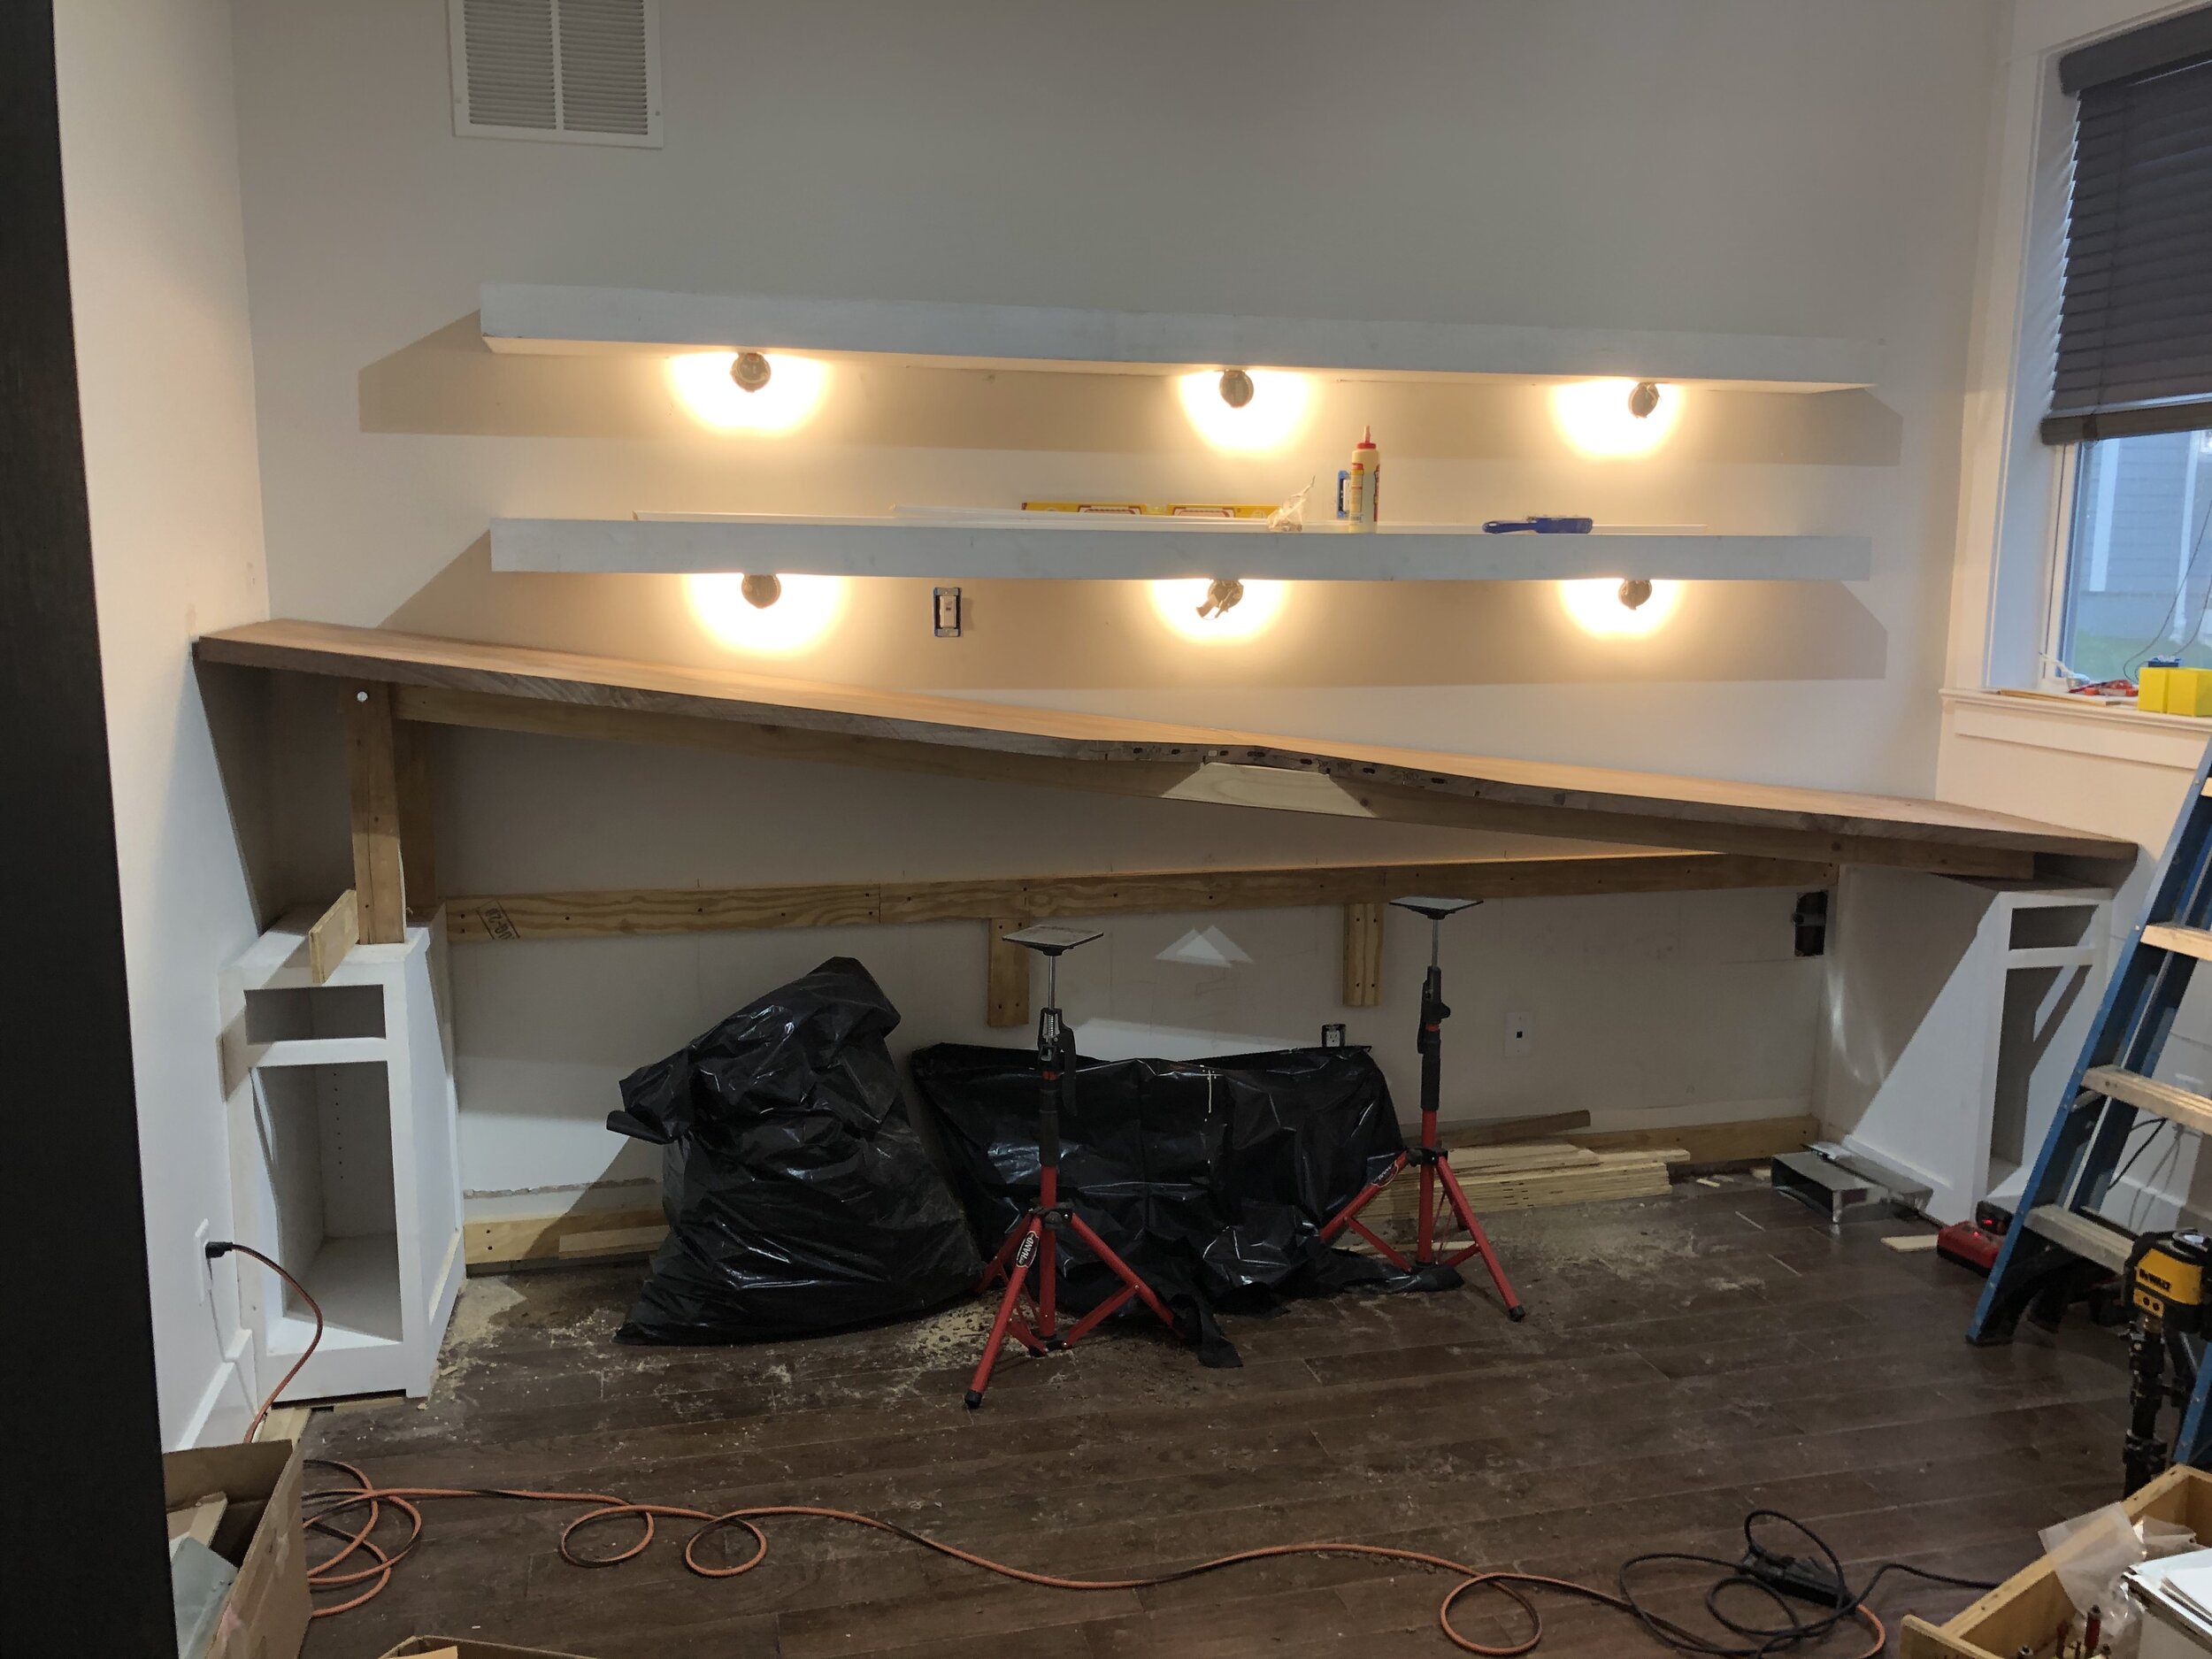  Once I had the desktop sections shaped and dry-fit in my shop, it was time to install them. The first two sections would go along the wall, with the third coming in at a 90 degree angle to create the T-shaped desktop. In order to install it safely b